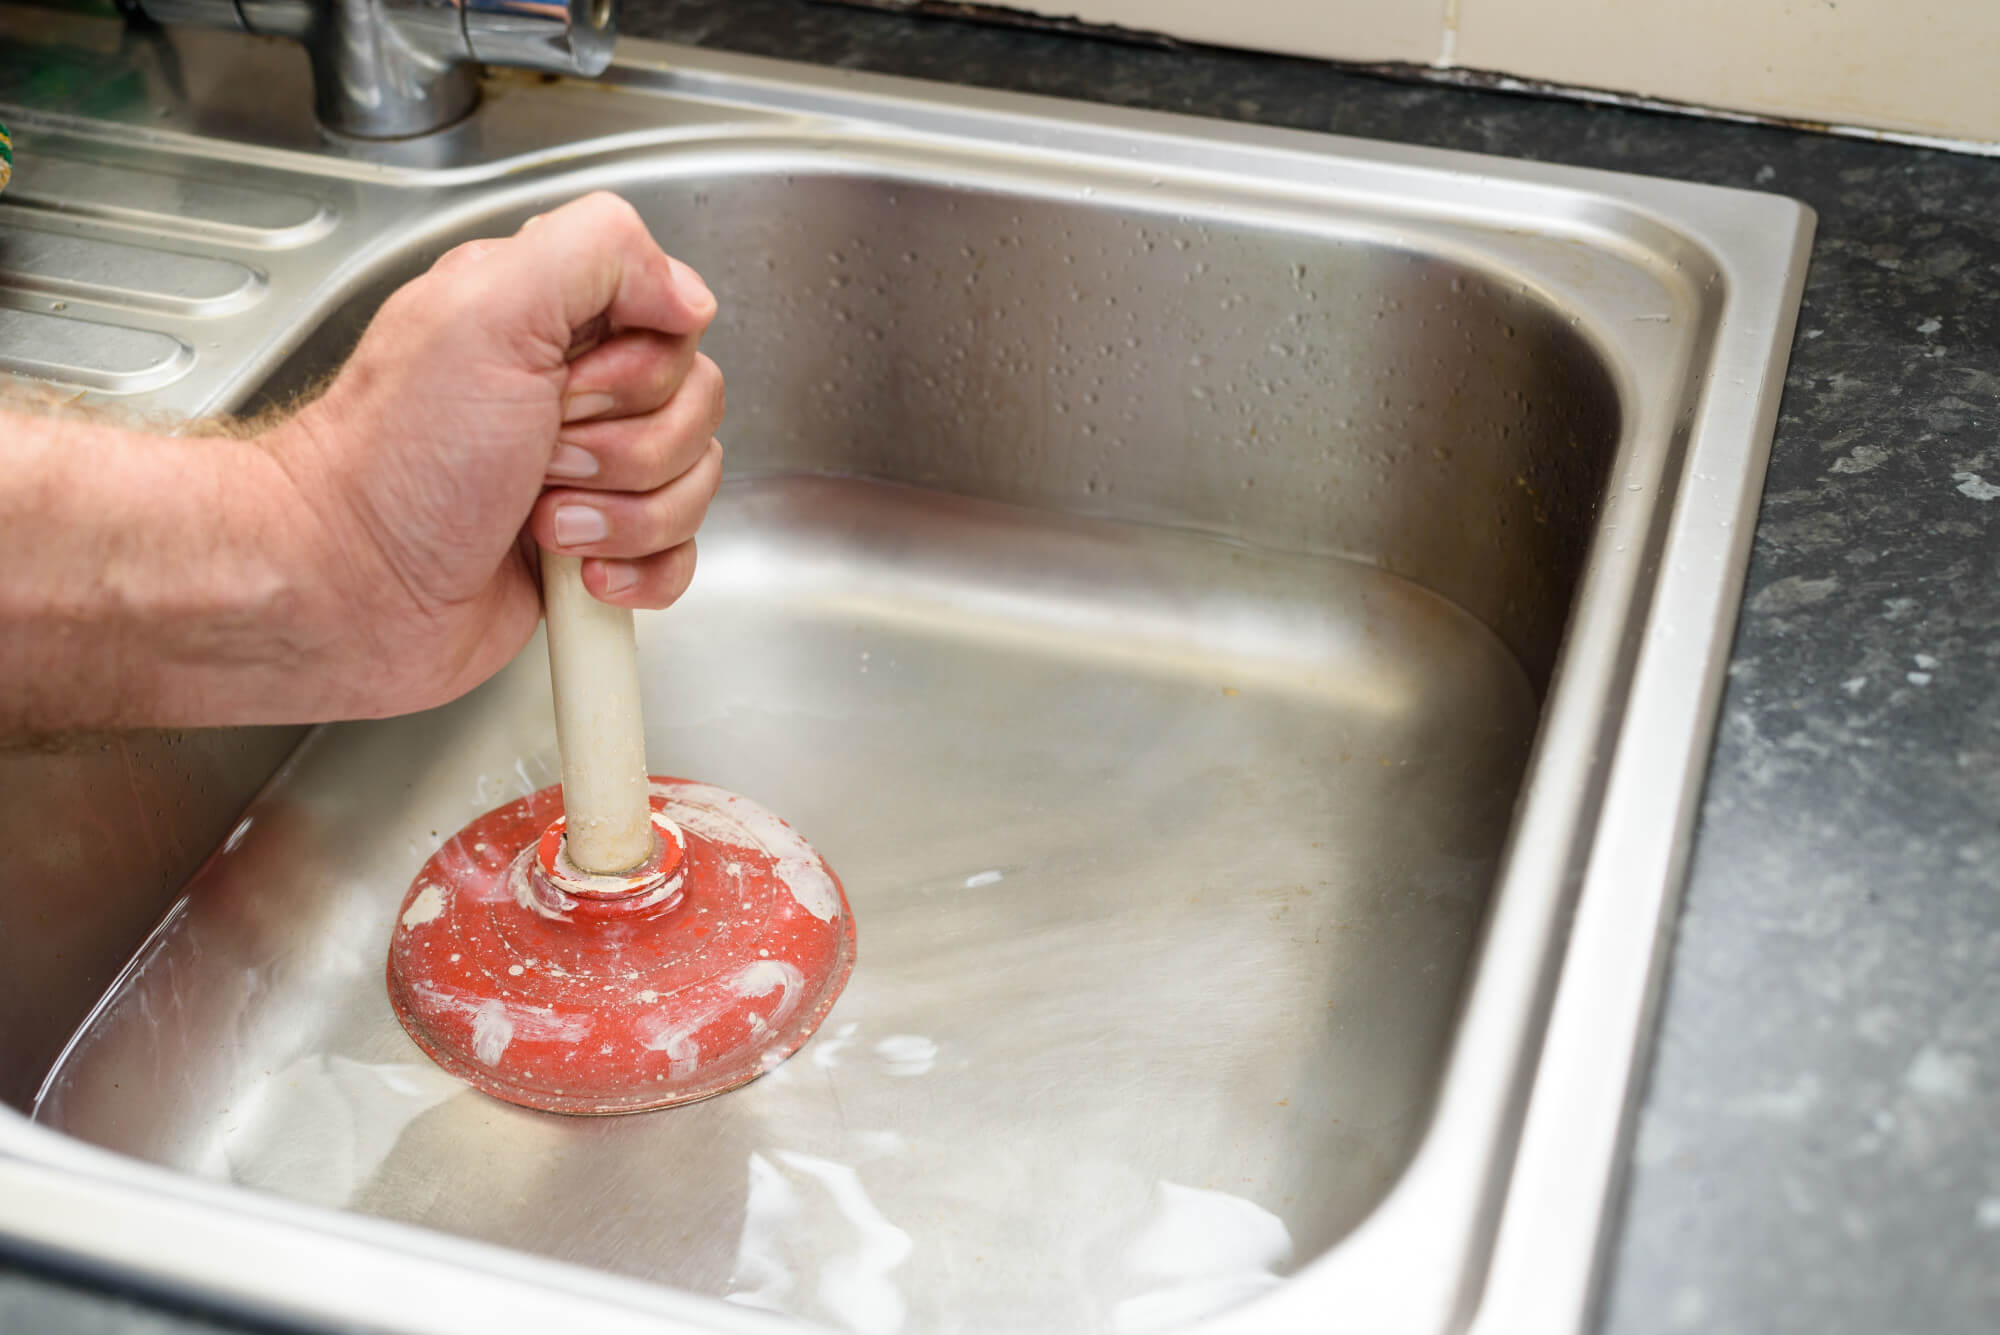 Common Causes of Kitchen Sink Drainage Issues